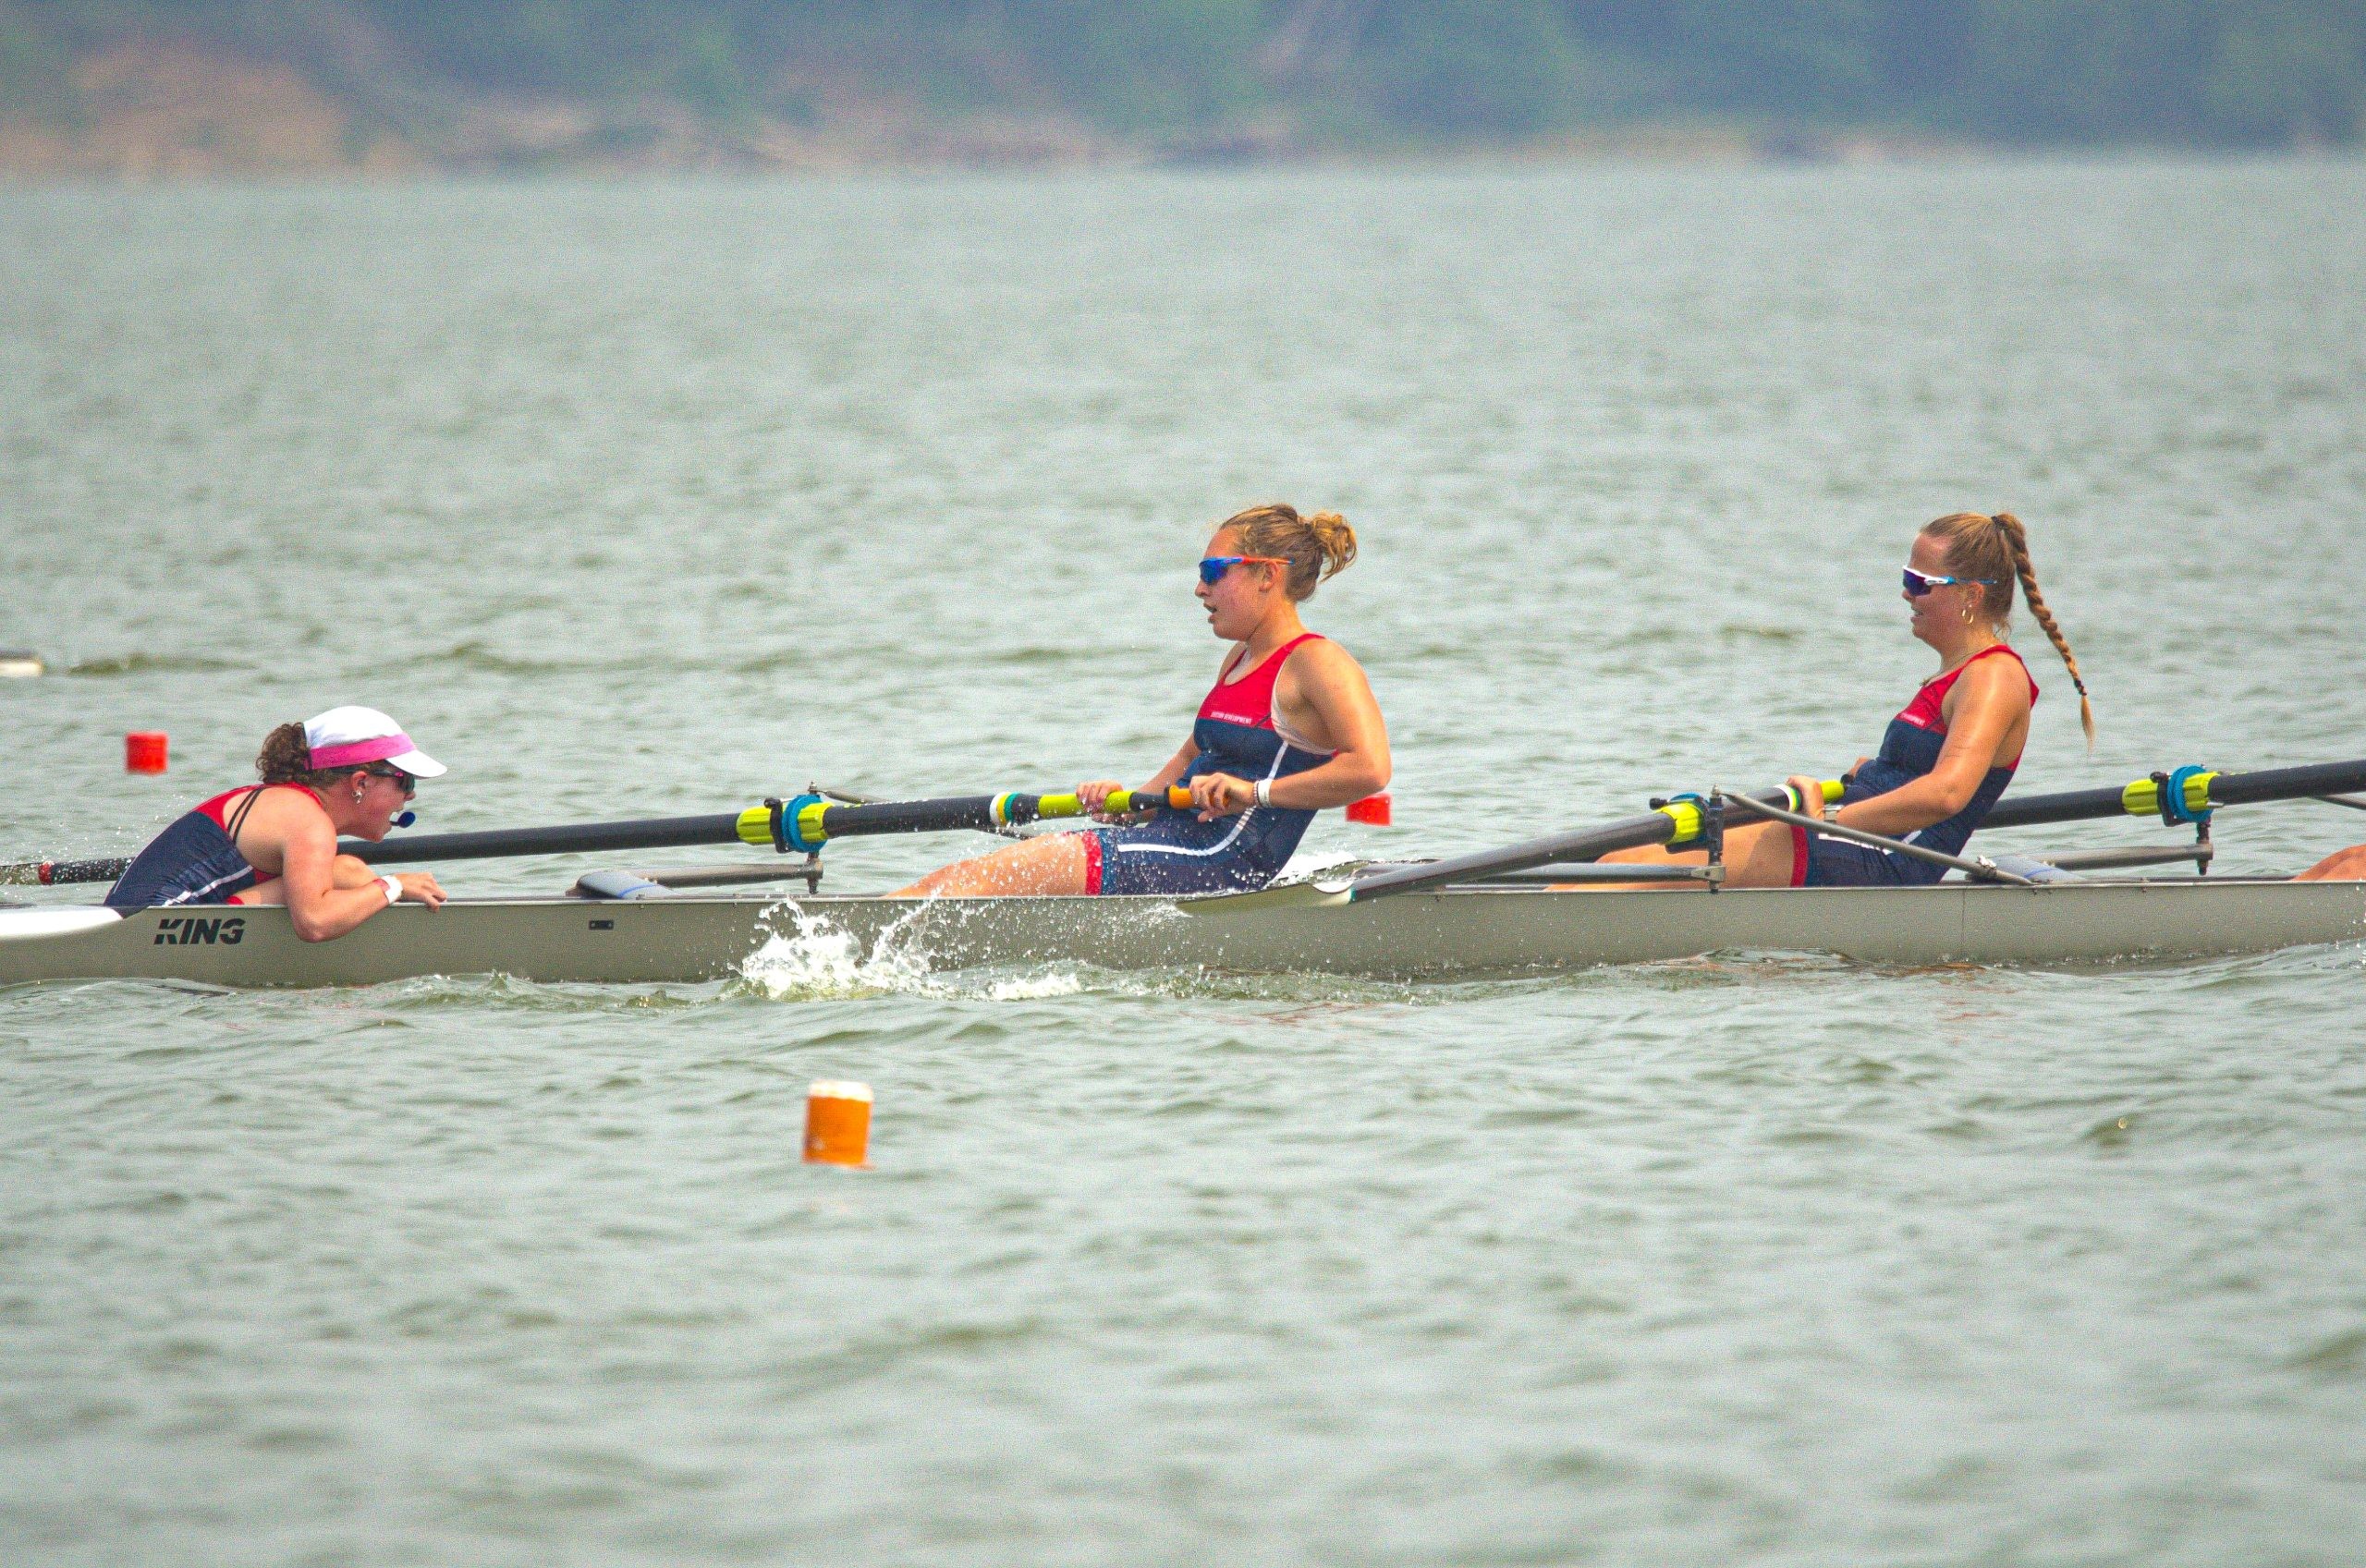 Local Capital Crew rower strikes gold at US Summer Nationals